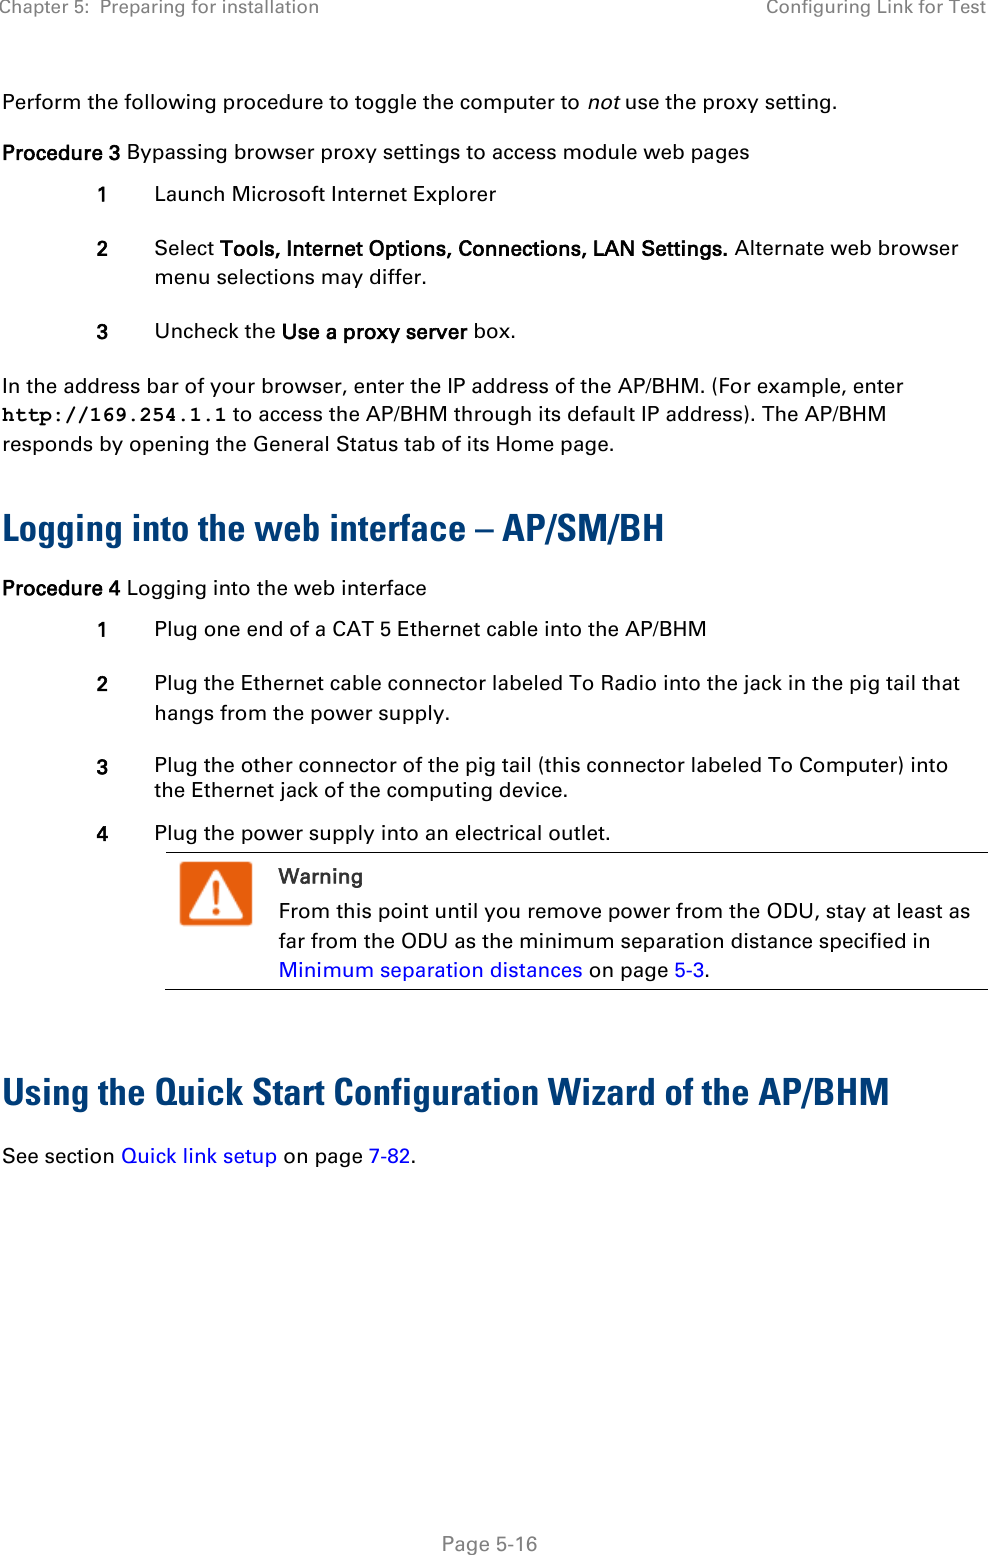 Chapter 5:  Preparing for installation Configuring Link for Test   Page 5-16 Perform the following procedure to toggle the computer to not use the proxy setting. Procedure 3 Bypassing browser proxy settings to access module web pages 1 Launch Microsoft Internet Explorer 2 Select Tools, Internet Options, Connections, LAN Settings. Alternate web browser menu selections may differ. 3 Uncheck the Use a proxy server box. In the address bar of your browser, enter the IP address of the AP/BHM. (For example, enter http://169.254.1.1 to access the AP/BHM through its default IP address). The AP/BHM responds by opening the General Status tab of its Home page.  Logging into the web interface – AP/SM/BH Procedure 4 Logging into the web interface 1 Plug one end of a CAT 5 Ethernet cable into the AP/BHM 2 Plug the Ethernet cable connector labeled To Radio into the jack in the pig tail that hangs from the power supply. 3 Plug the other connector of the pig tail (this connector labeled To Computer) into the Ethernet jack of the computing device. 4 Plug the power supply into an electrical outlet.  Warning From this point until you remove power from the ODU, stay at least as far from the ODU as the minimum separation distance specified in Minimum separation distances on page 5-3.   Using the Quick Start Configuration Wizard of the AP/BHM See section Quick link setup on page 7-82.       